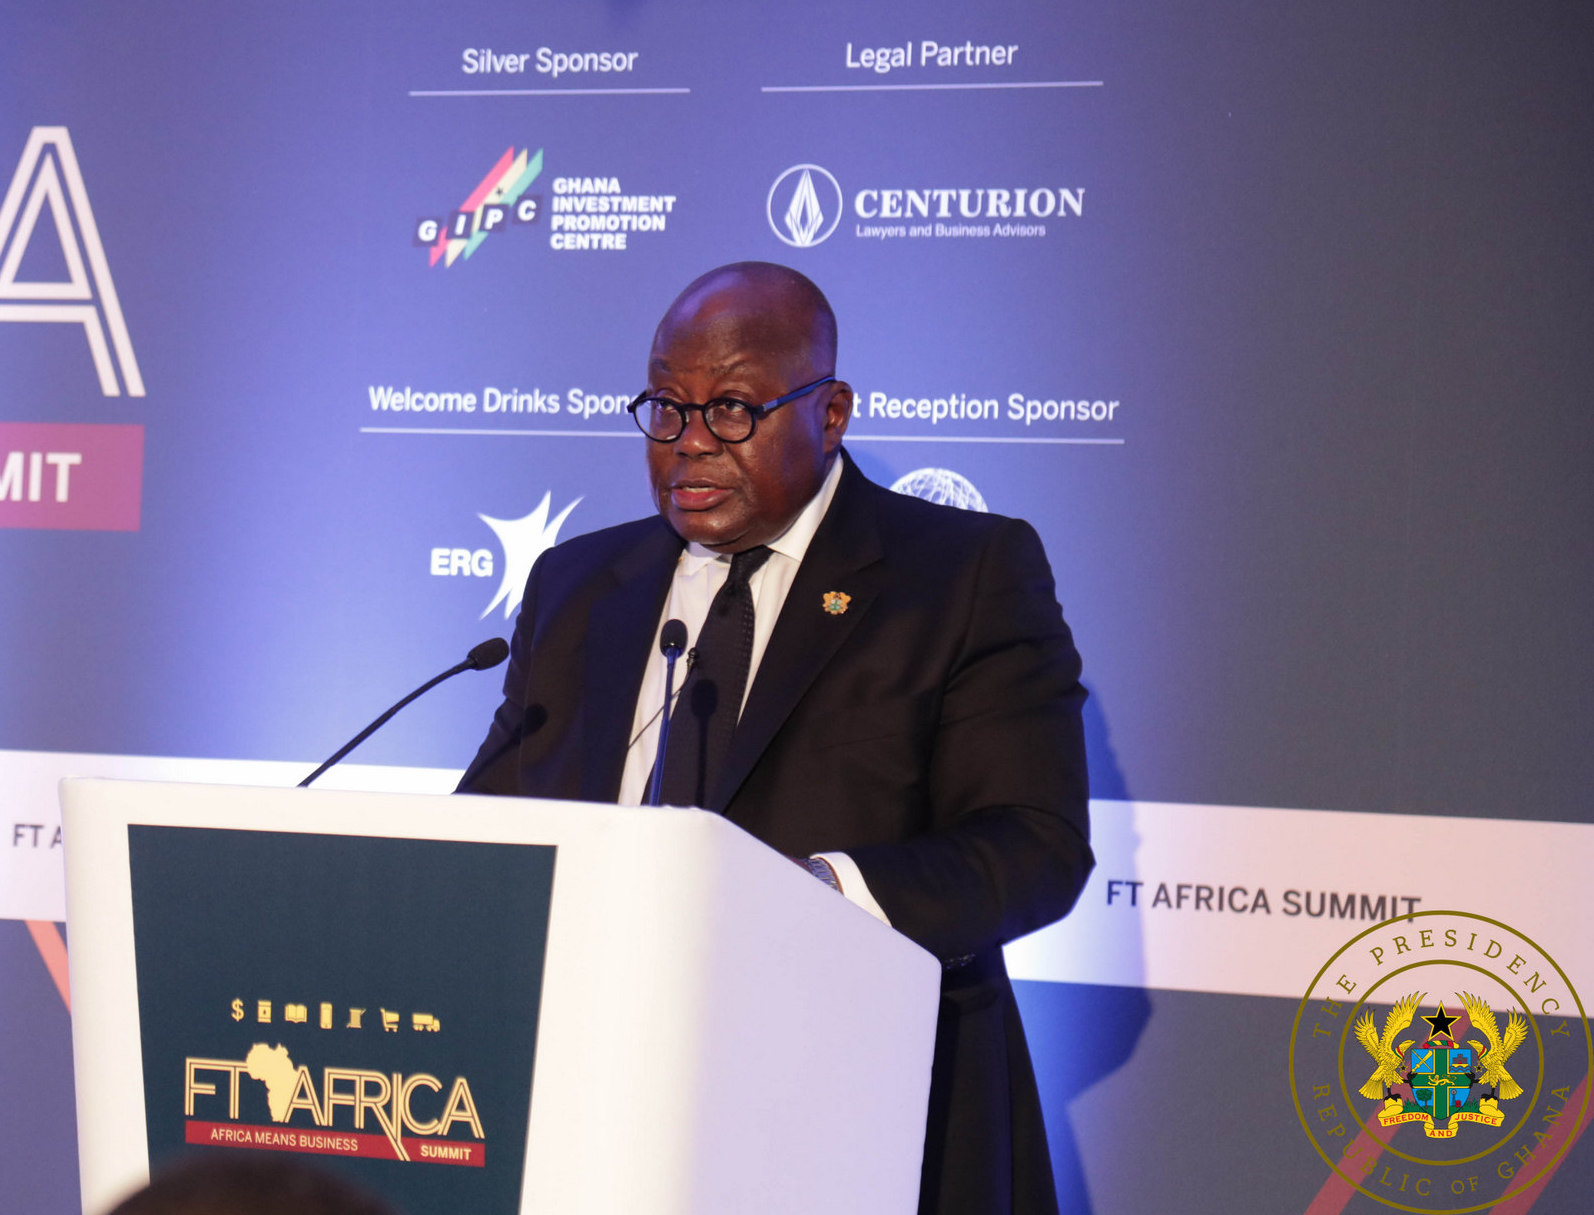 President Akufo-Addo speaking at the Financial Times Africa Summit